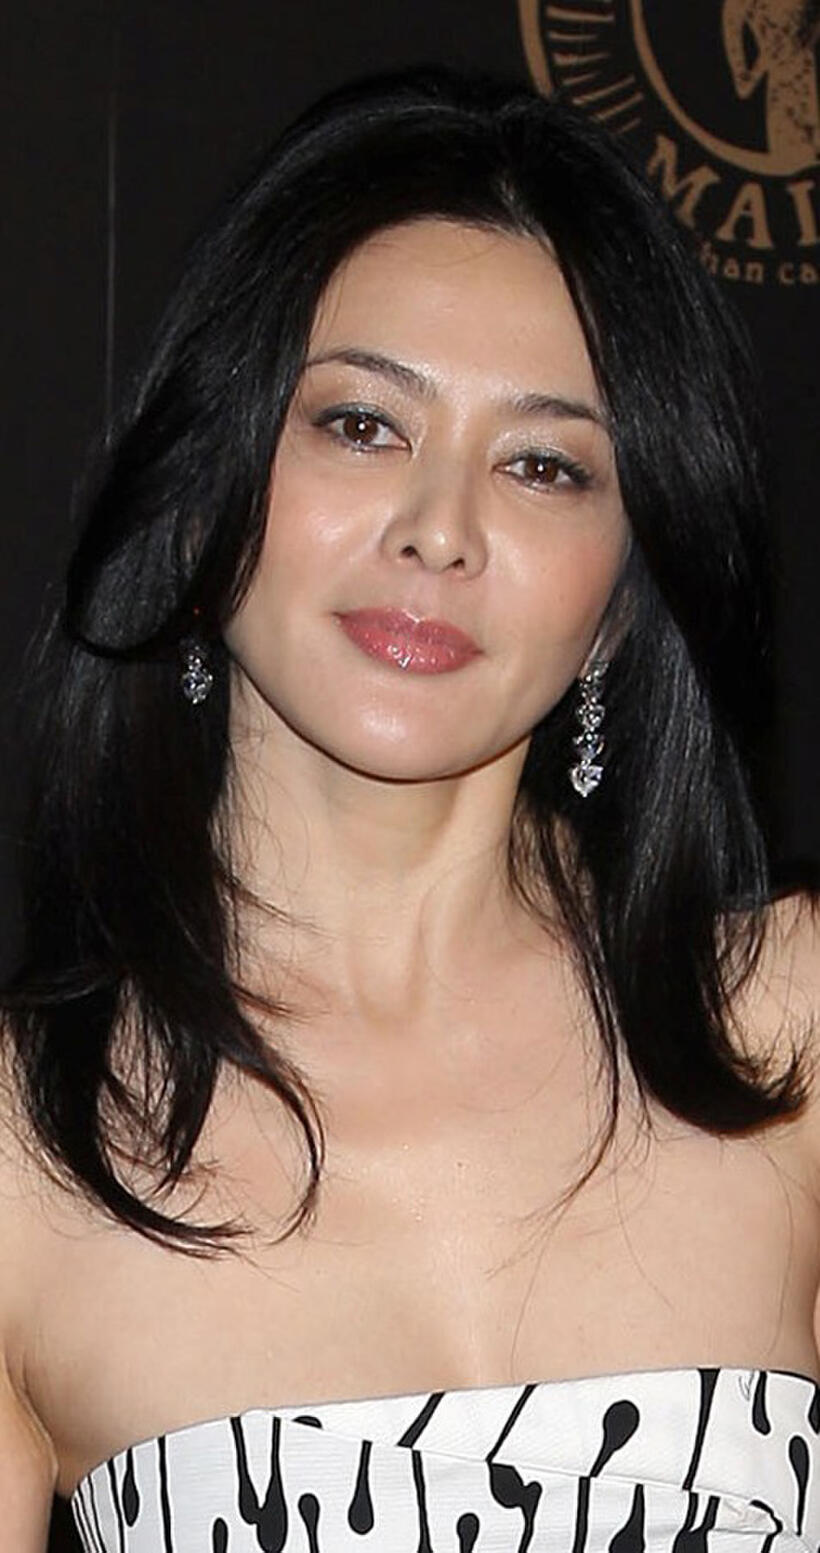 Rosamund Kwan at the reception to benefit UNICEF hosted by Gucci during the Mercedes-Benz Fashion Week Fall 2008 in New York.